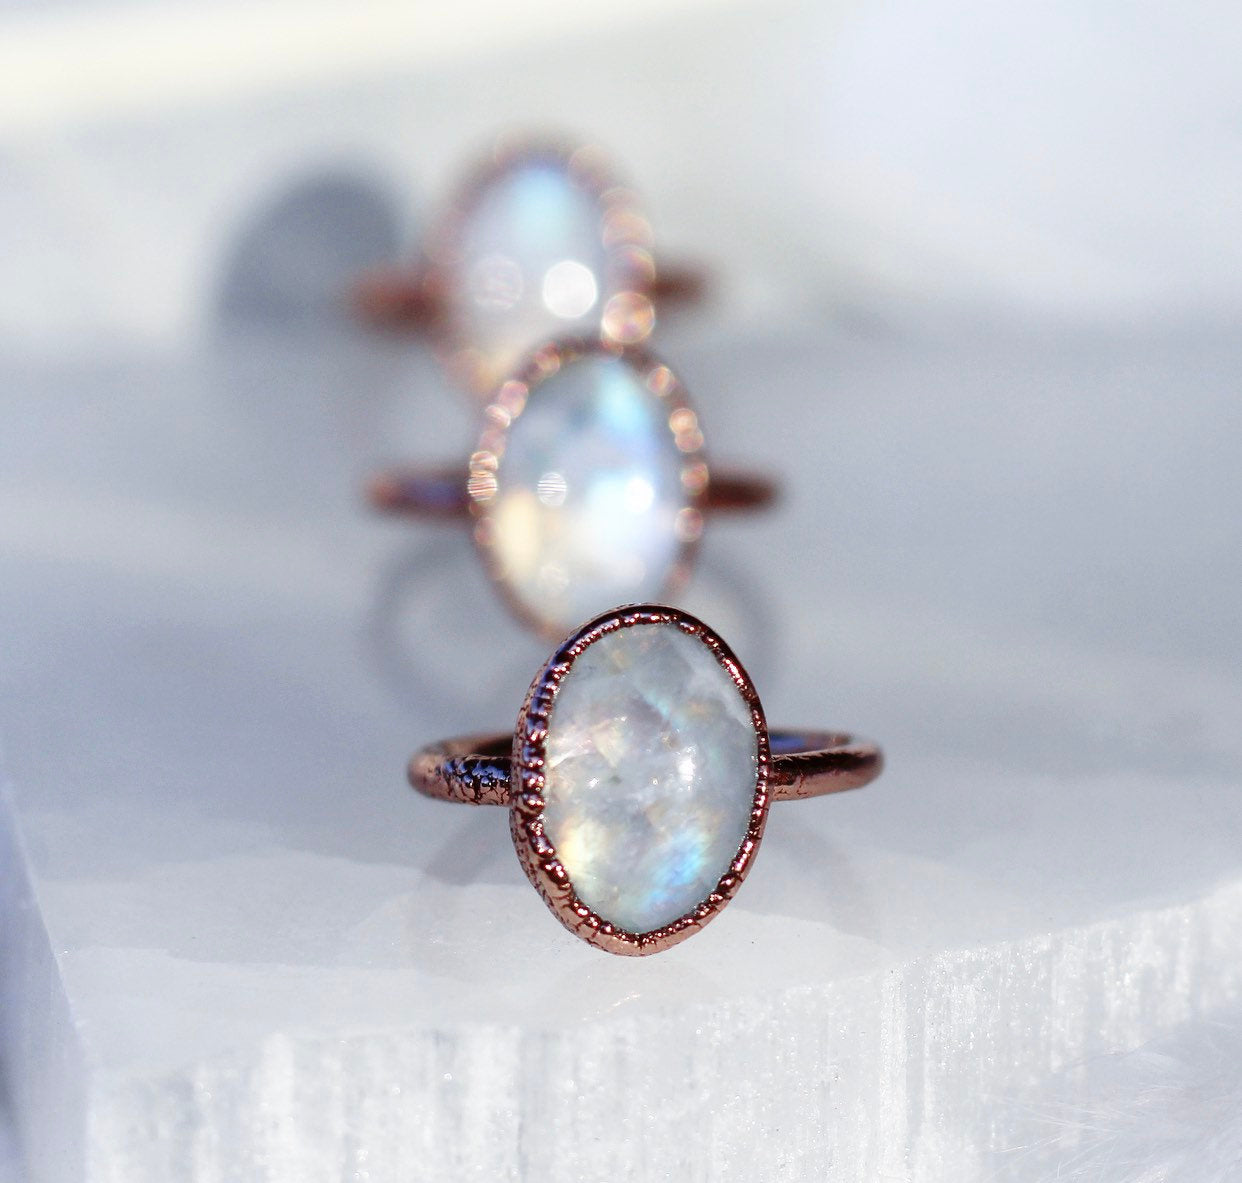 Moonstone Oval Ring, Moonstone Raw Stone, Big Raw Moonstone Ring, Rainbow Moonstone Ring, Moonstone Copper Ring, Raw Chunky Stone Ring